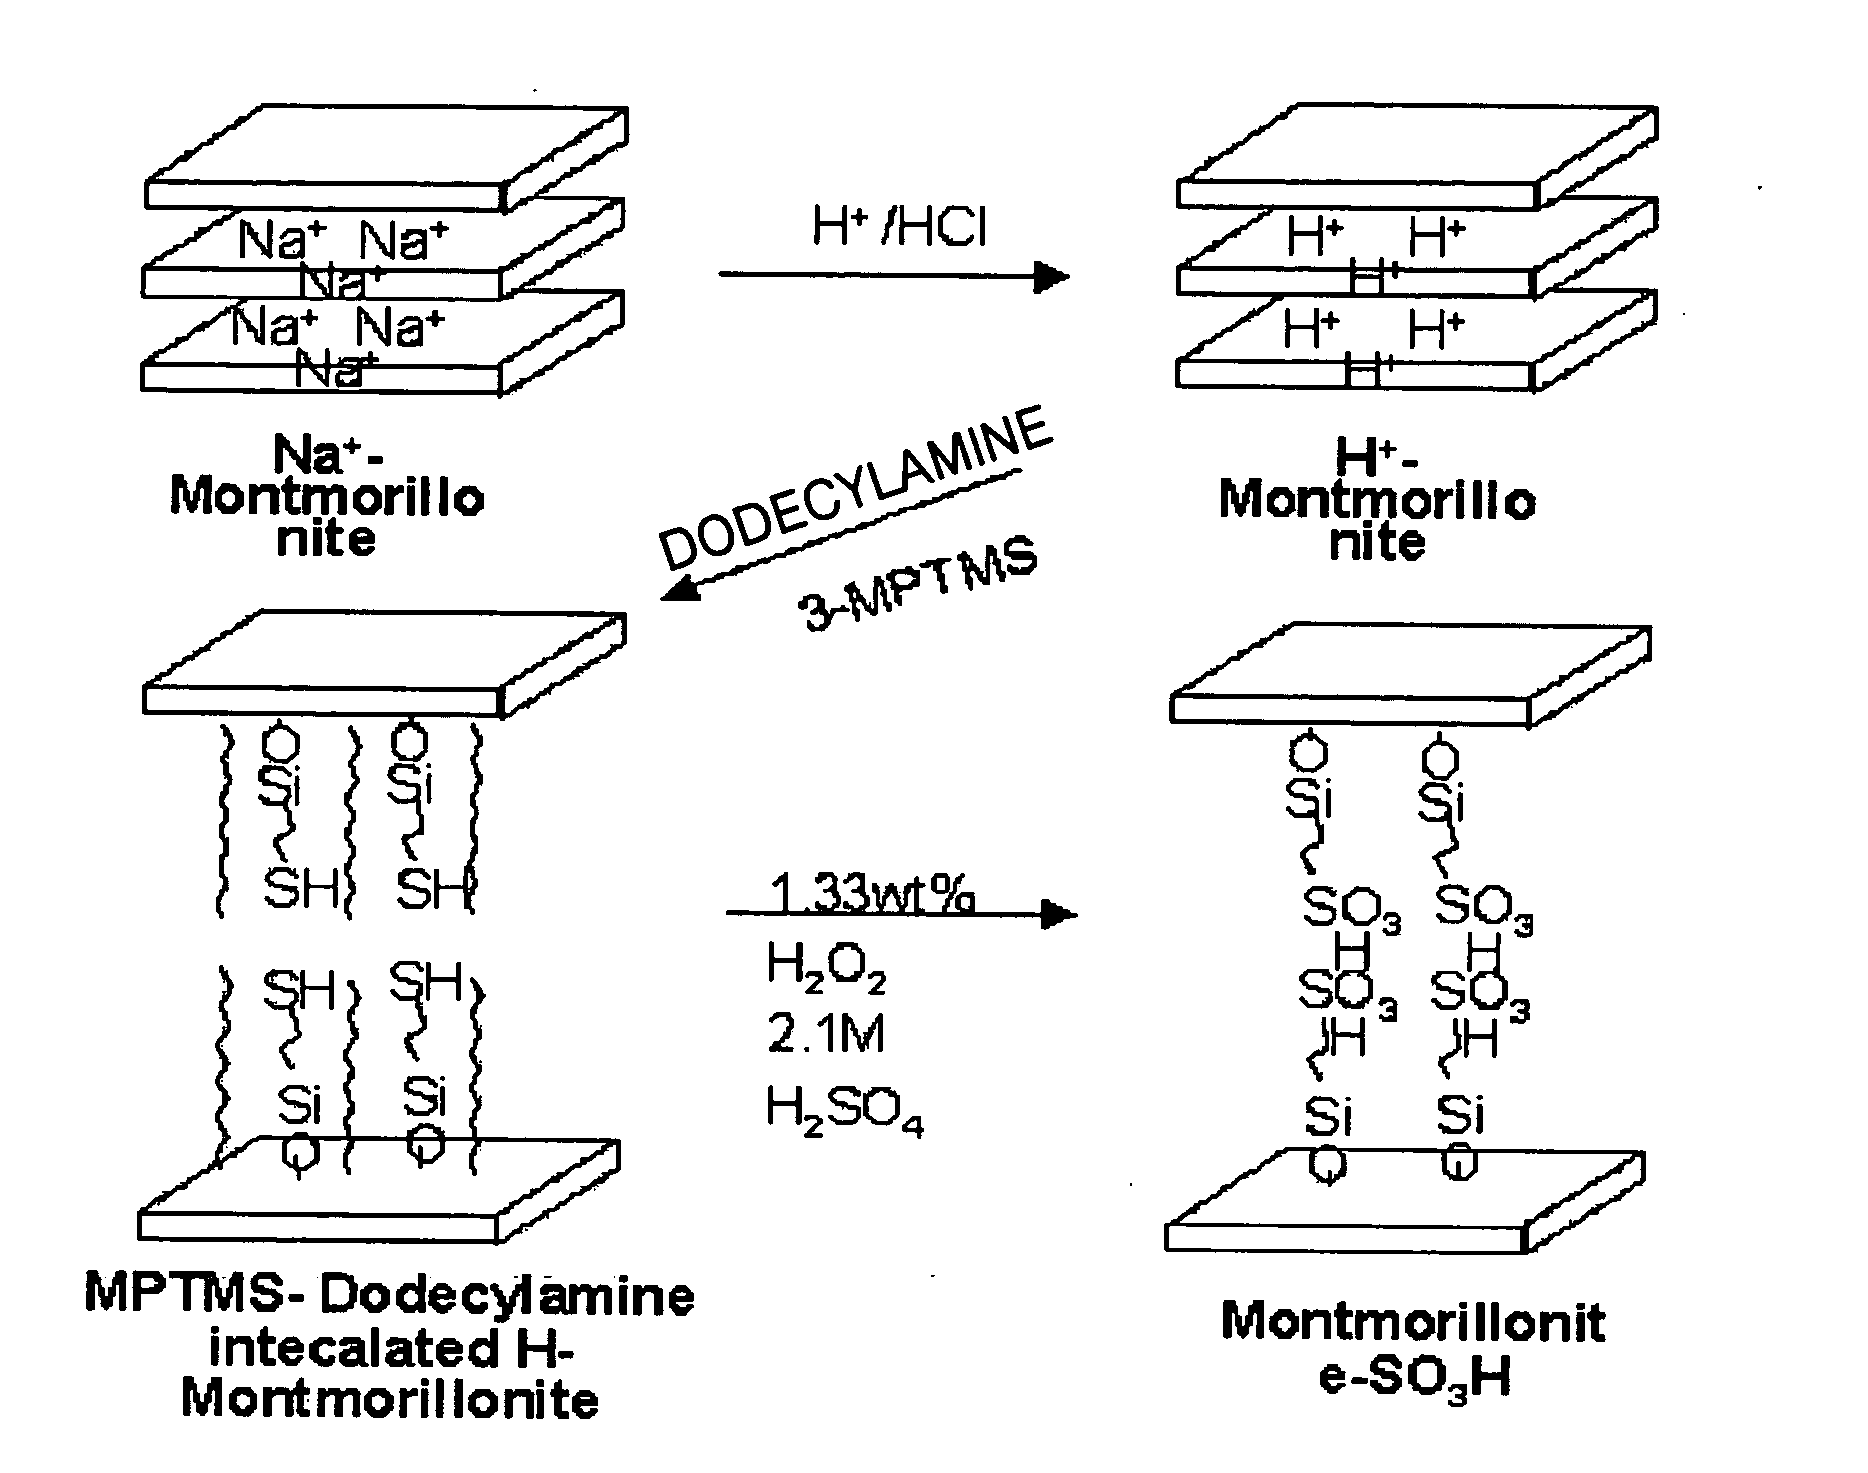 Polymer nanocomposite membrane and fuel cell using the same